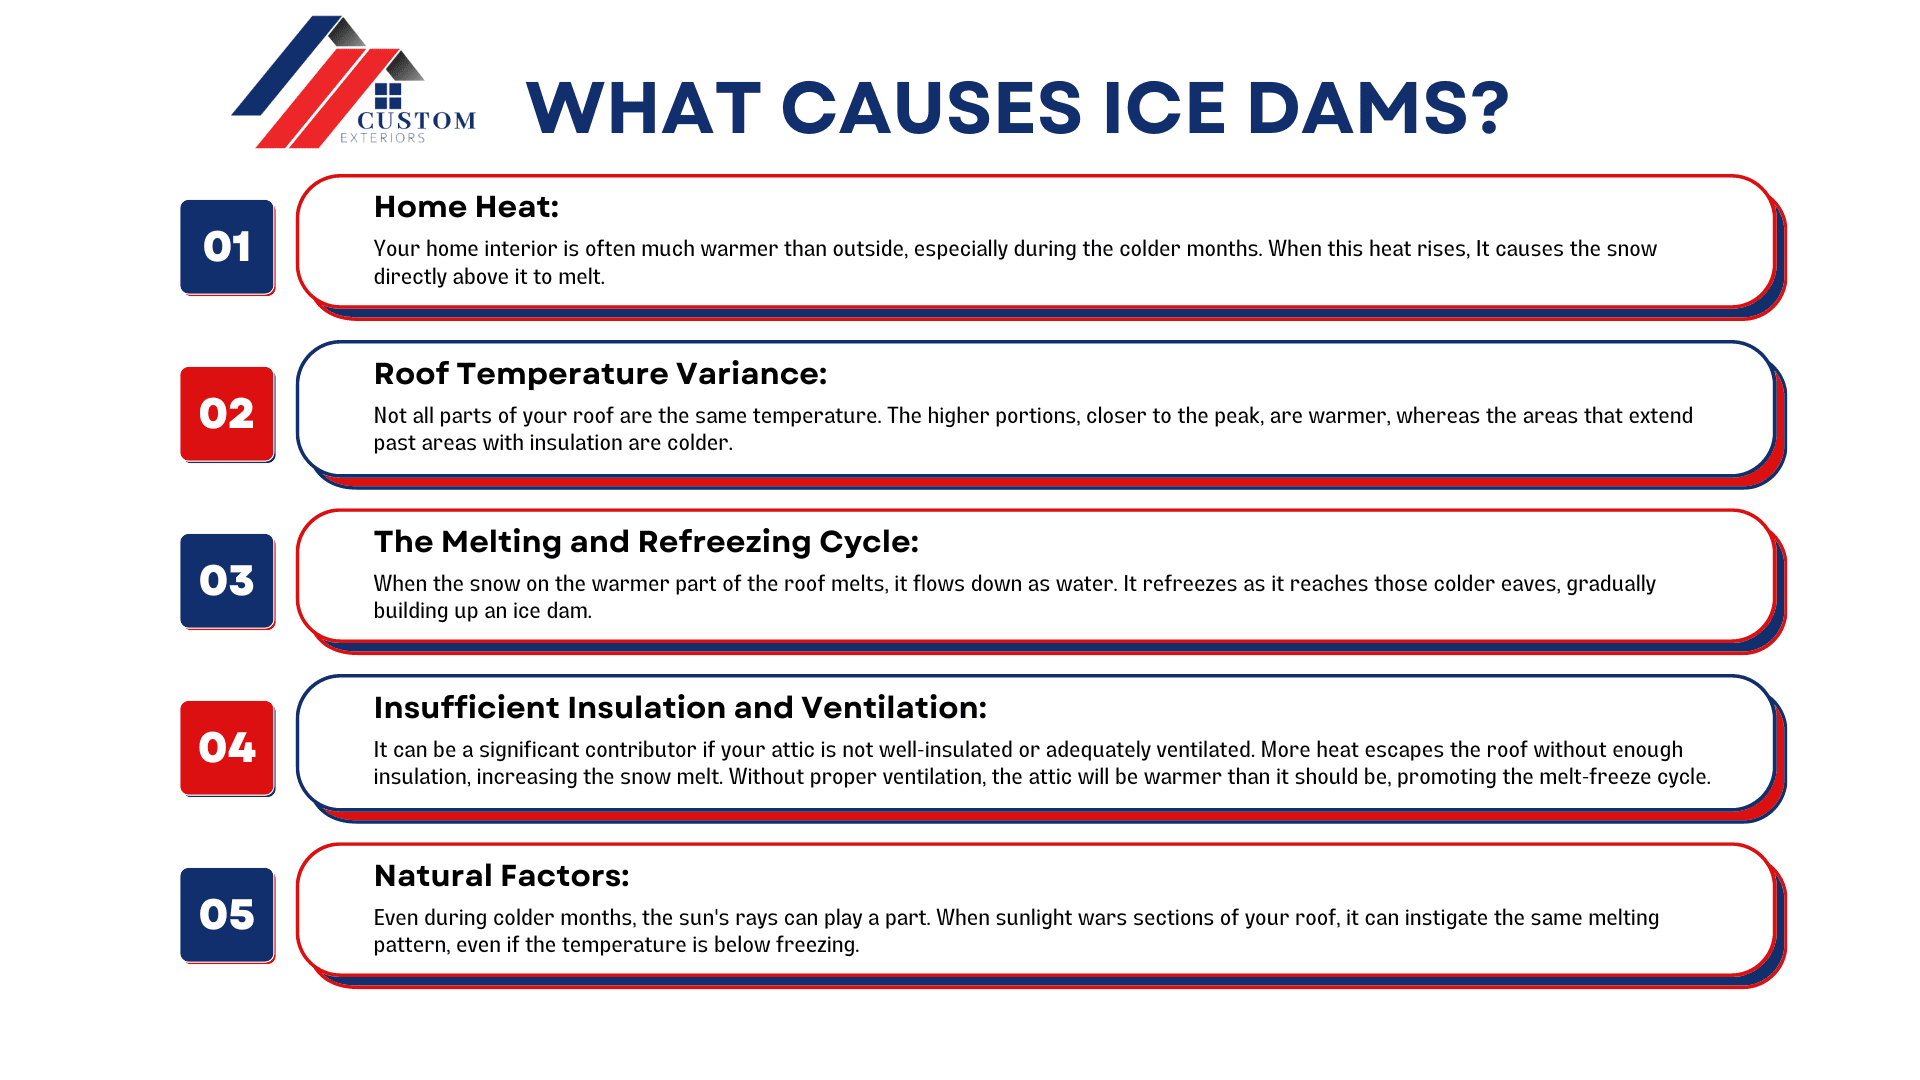 Infographic explaining what causes ice dams on your roof